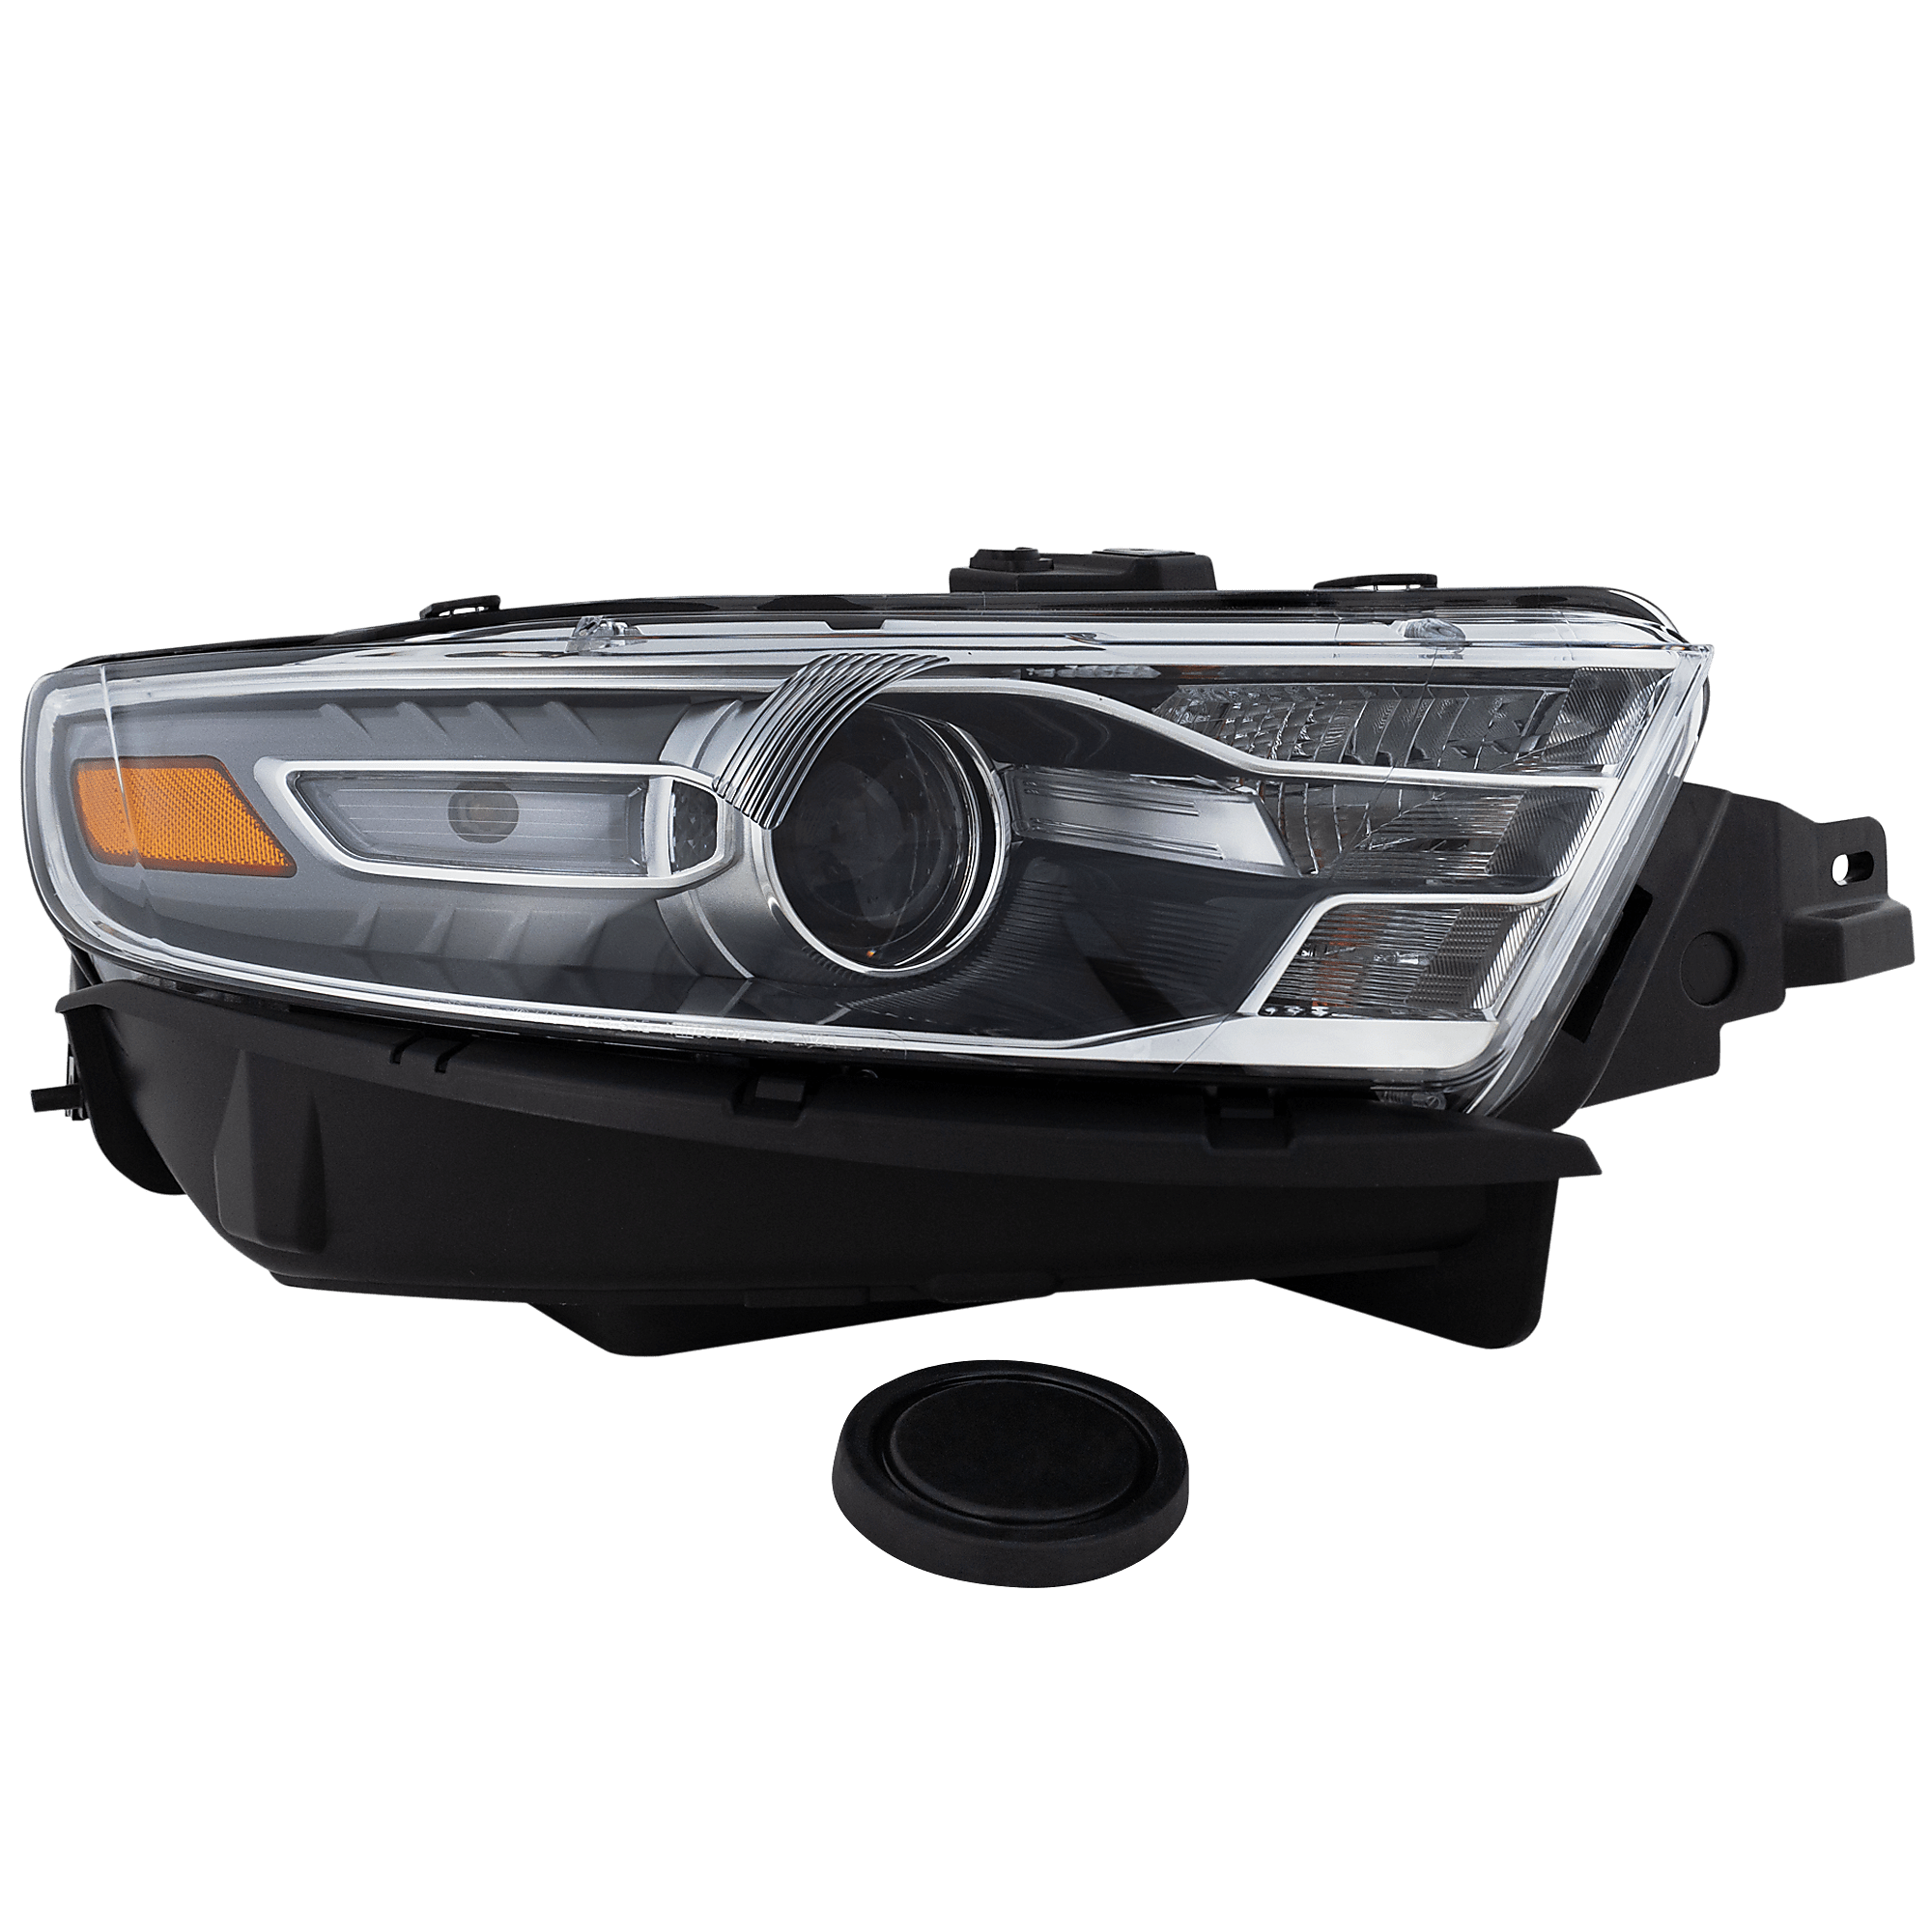 2013 Ford Taurus Headlights from $401 | CarParts.com 2013 Ford Taurus Limited Headlight Bulb Replacement